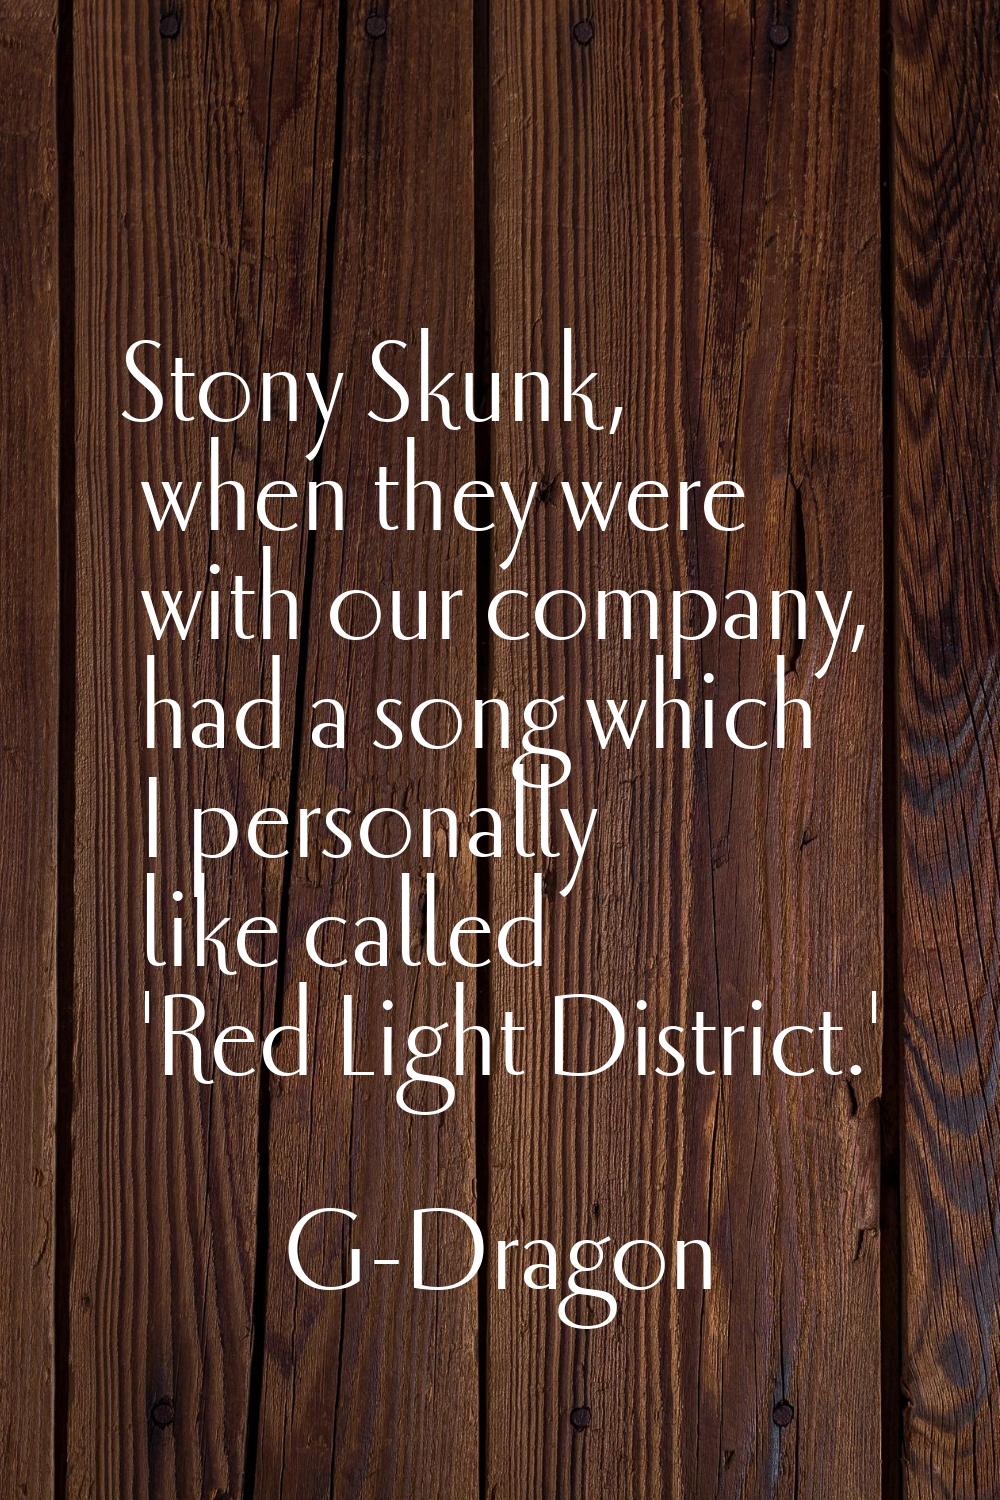 Stony Skunk, when they were with our company, had a song which I personally like called 'Red Light 